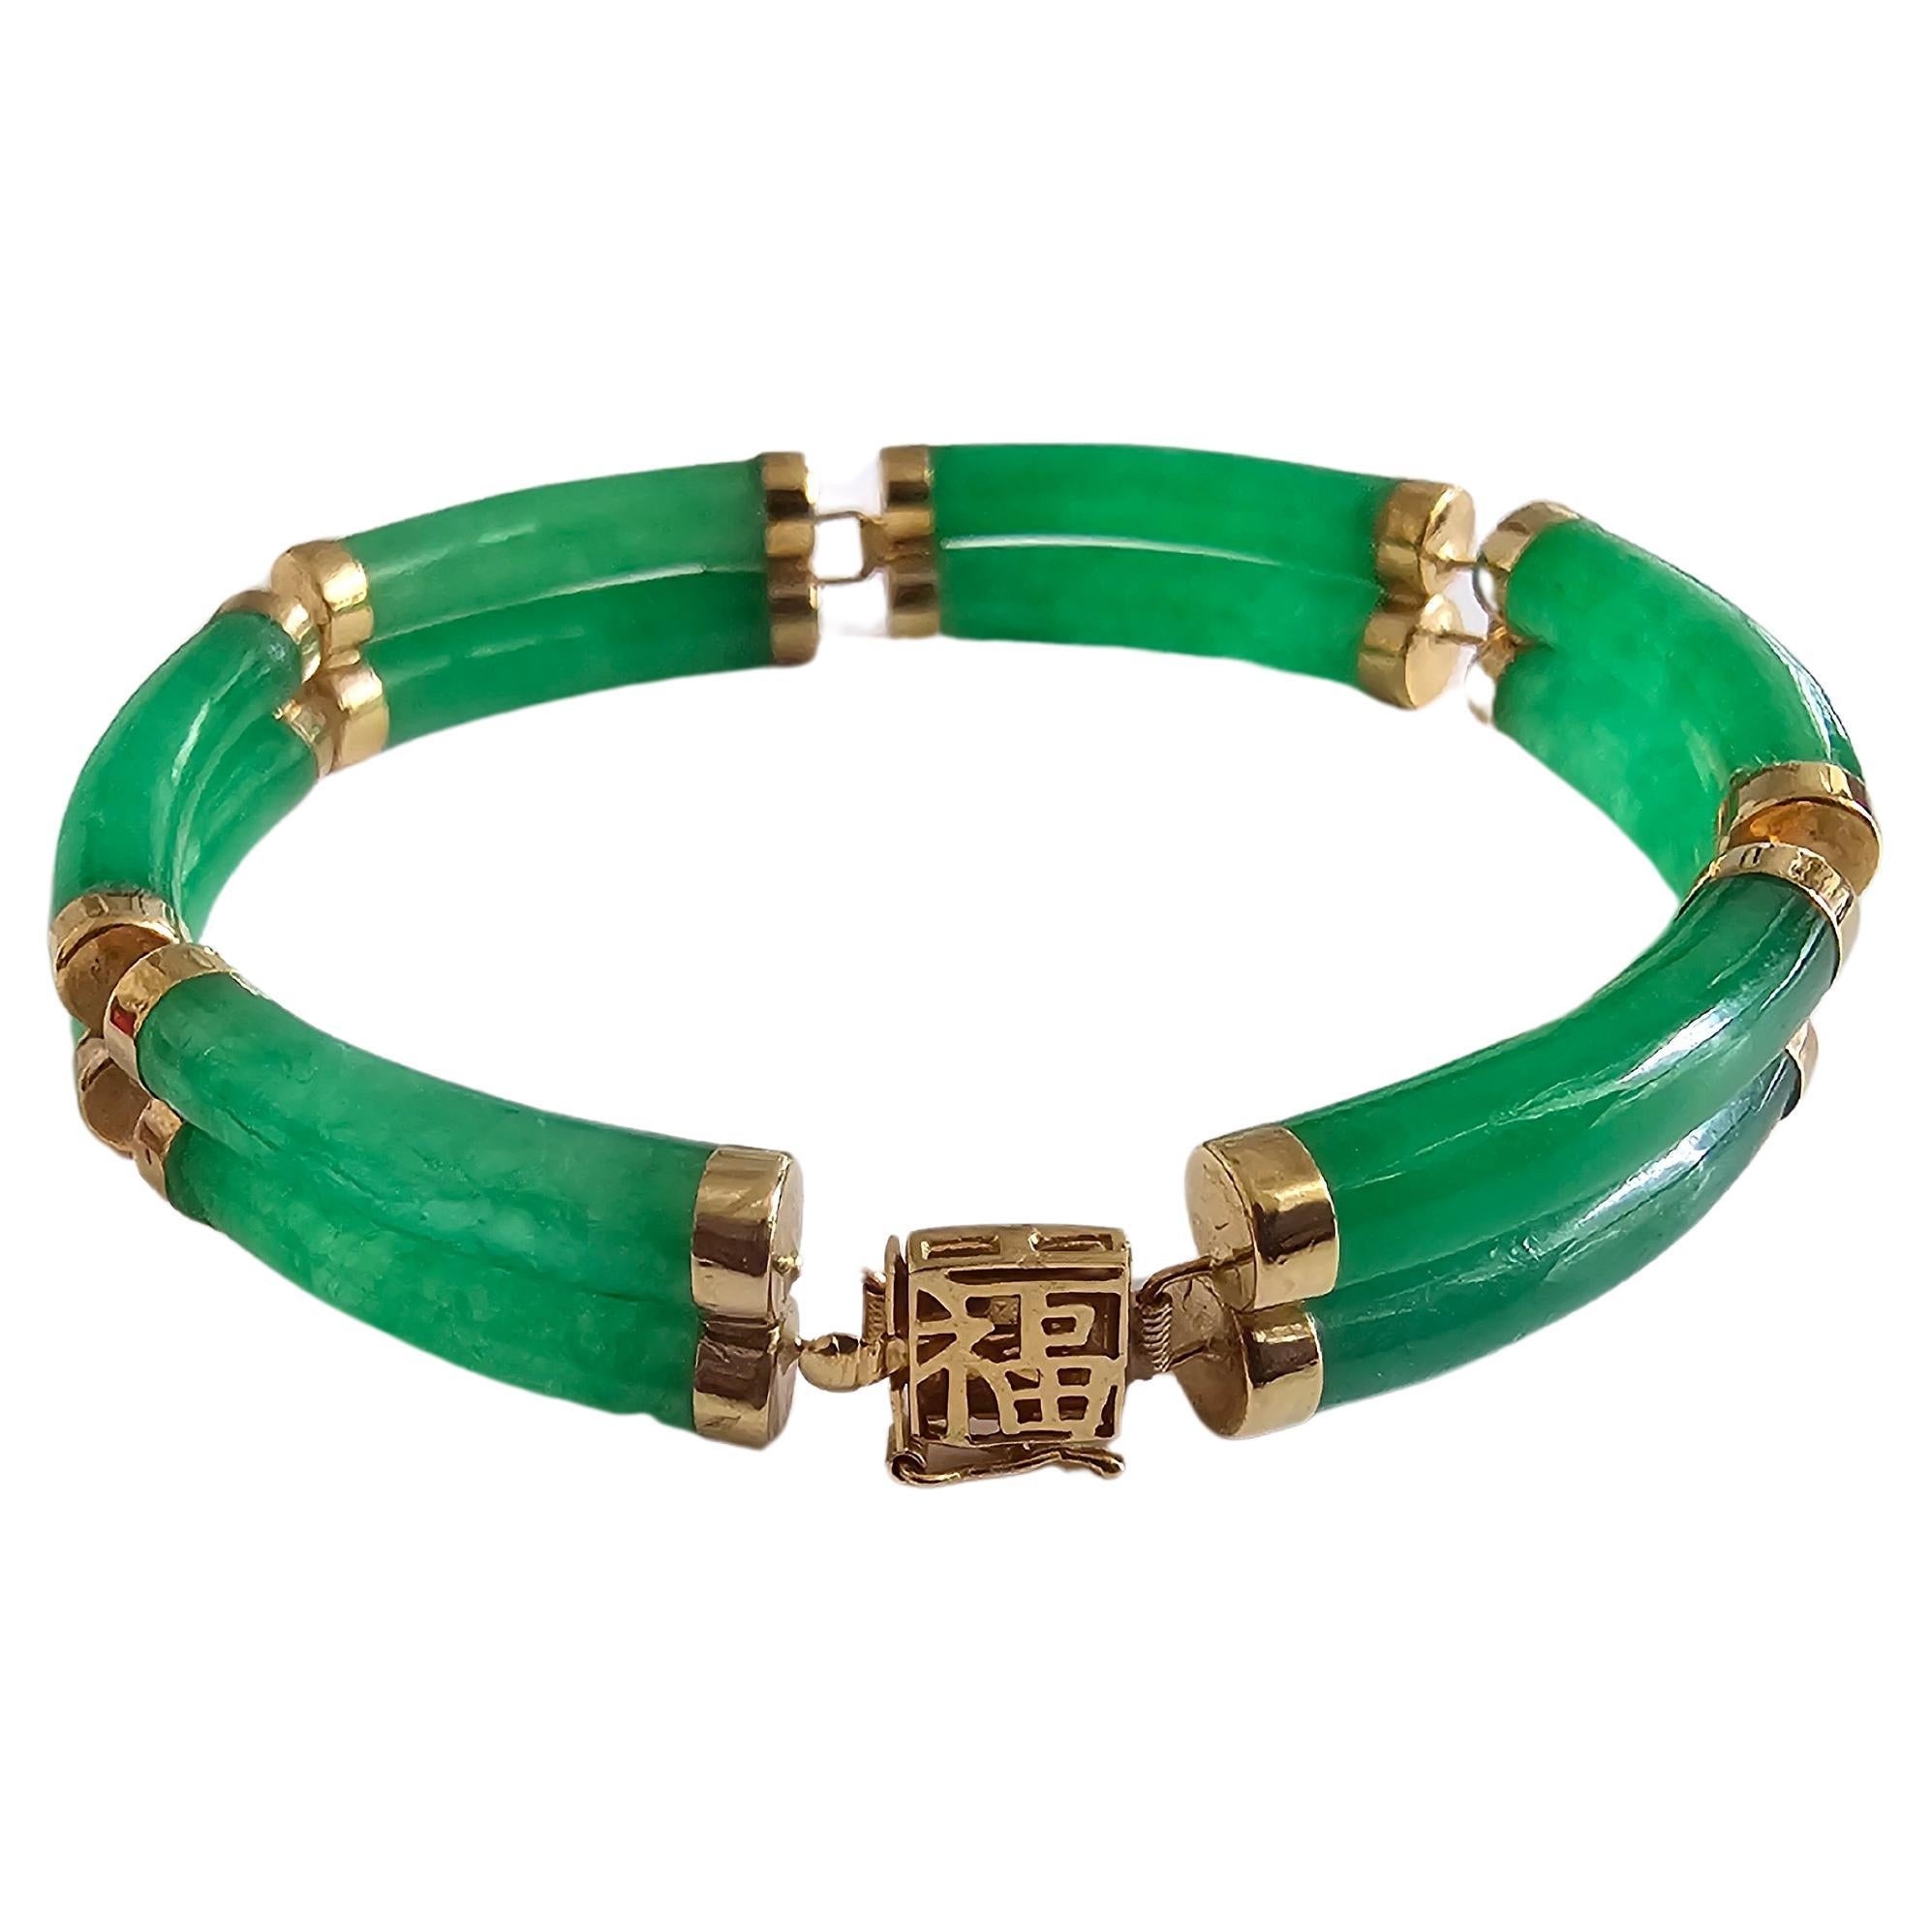 Fortune Jade Bracelet Double Bars with 14K Solid Yellow Gold links and clasp